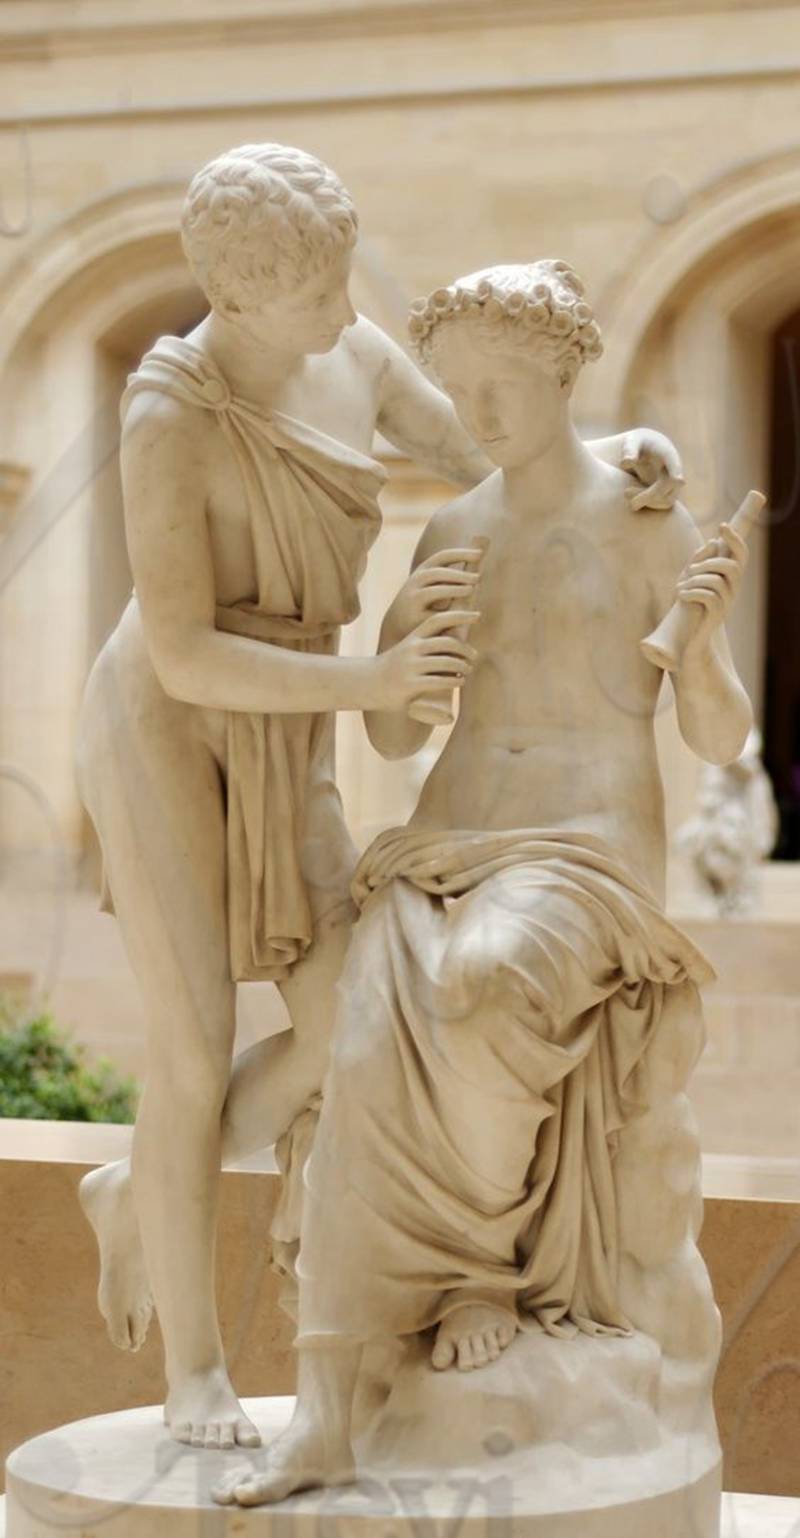 Is Marble Suitable for Statues?